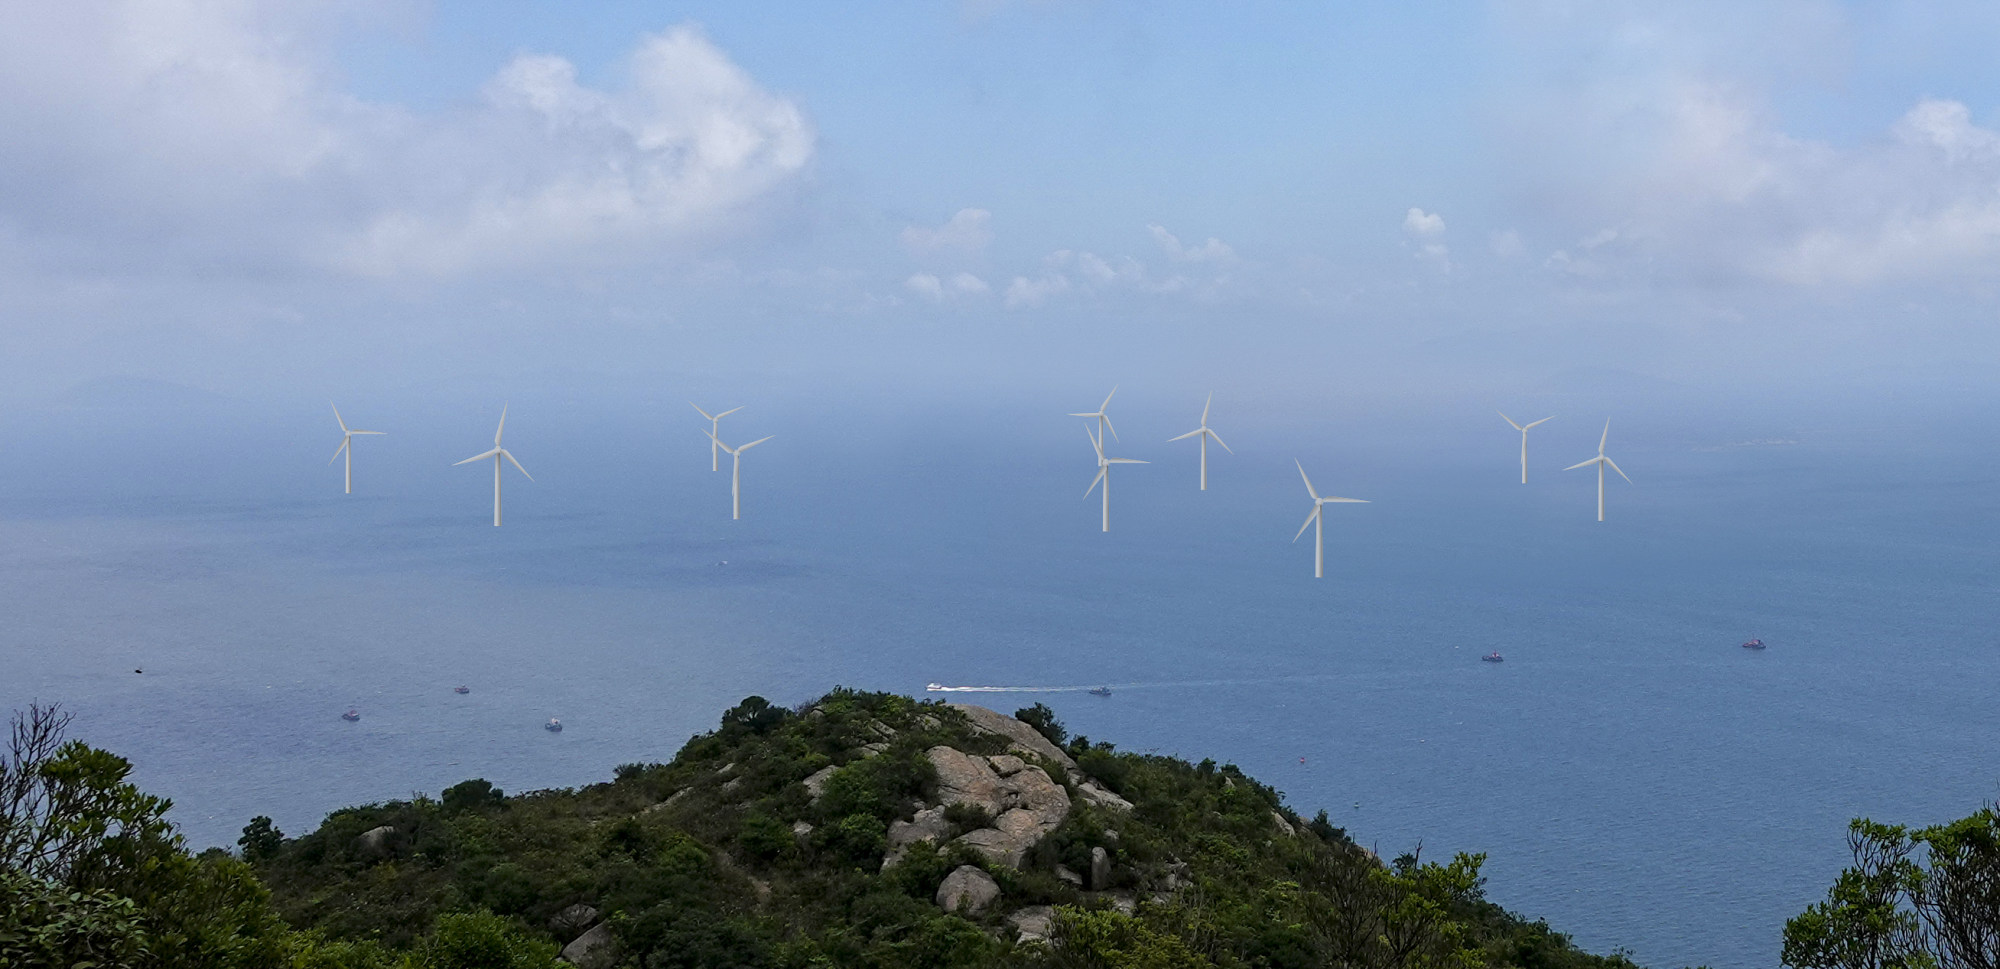 Hong Kong Electric is set to build an offshore wind farm that could account for 4 per cent of its total output by 2027 when it is commissioned. Photo: Handout